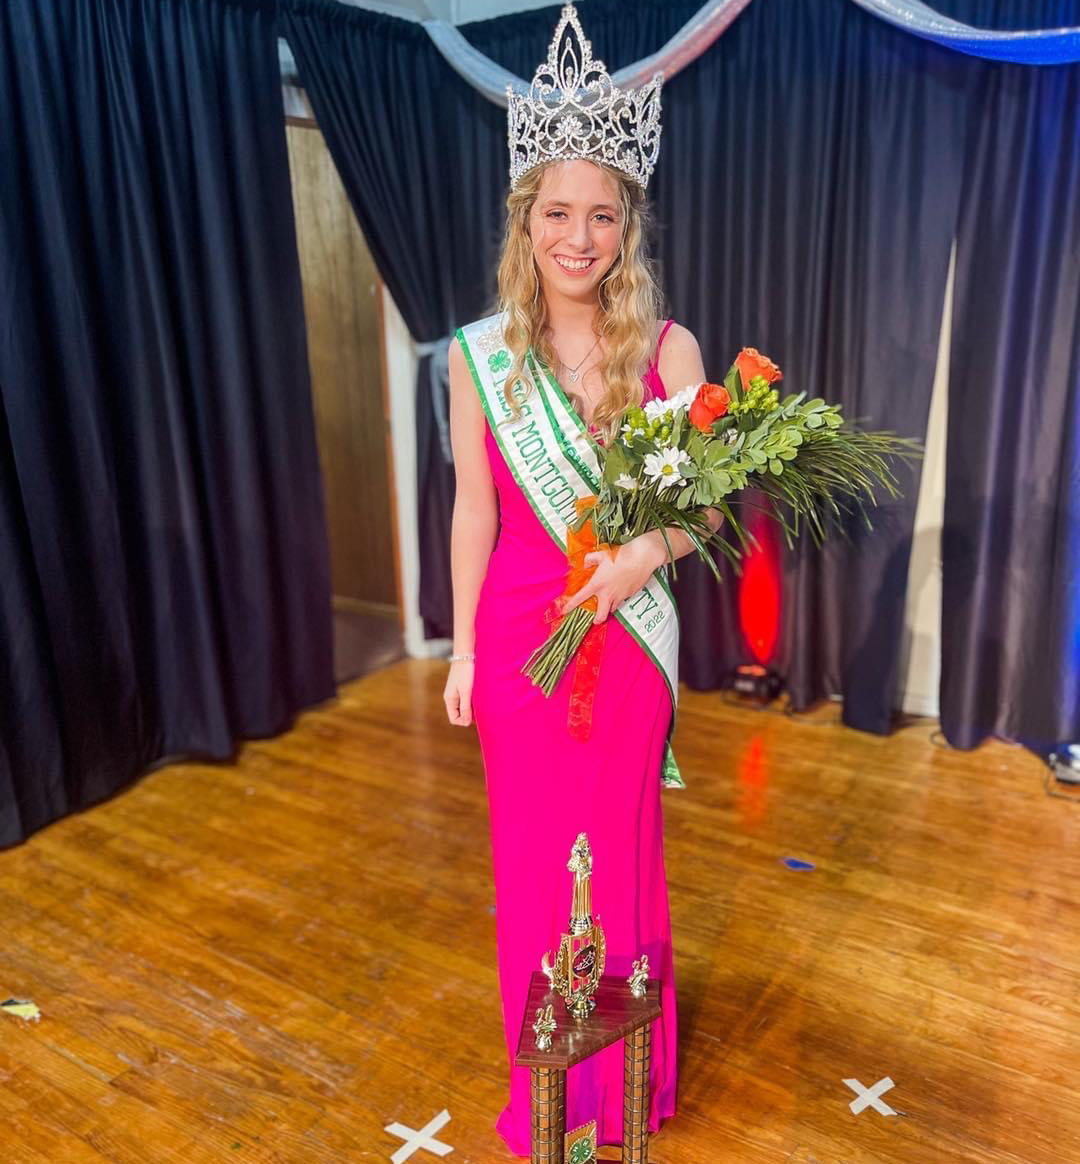 Maggie Michael took home the title of Miss Montgomery County and will now represent the county at the Indiana State Fair.